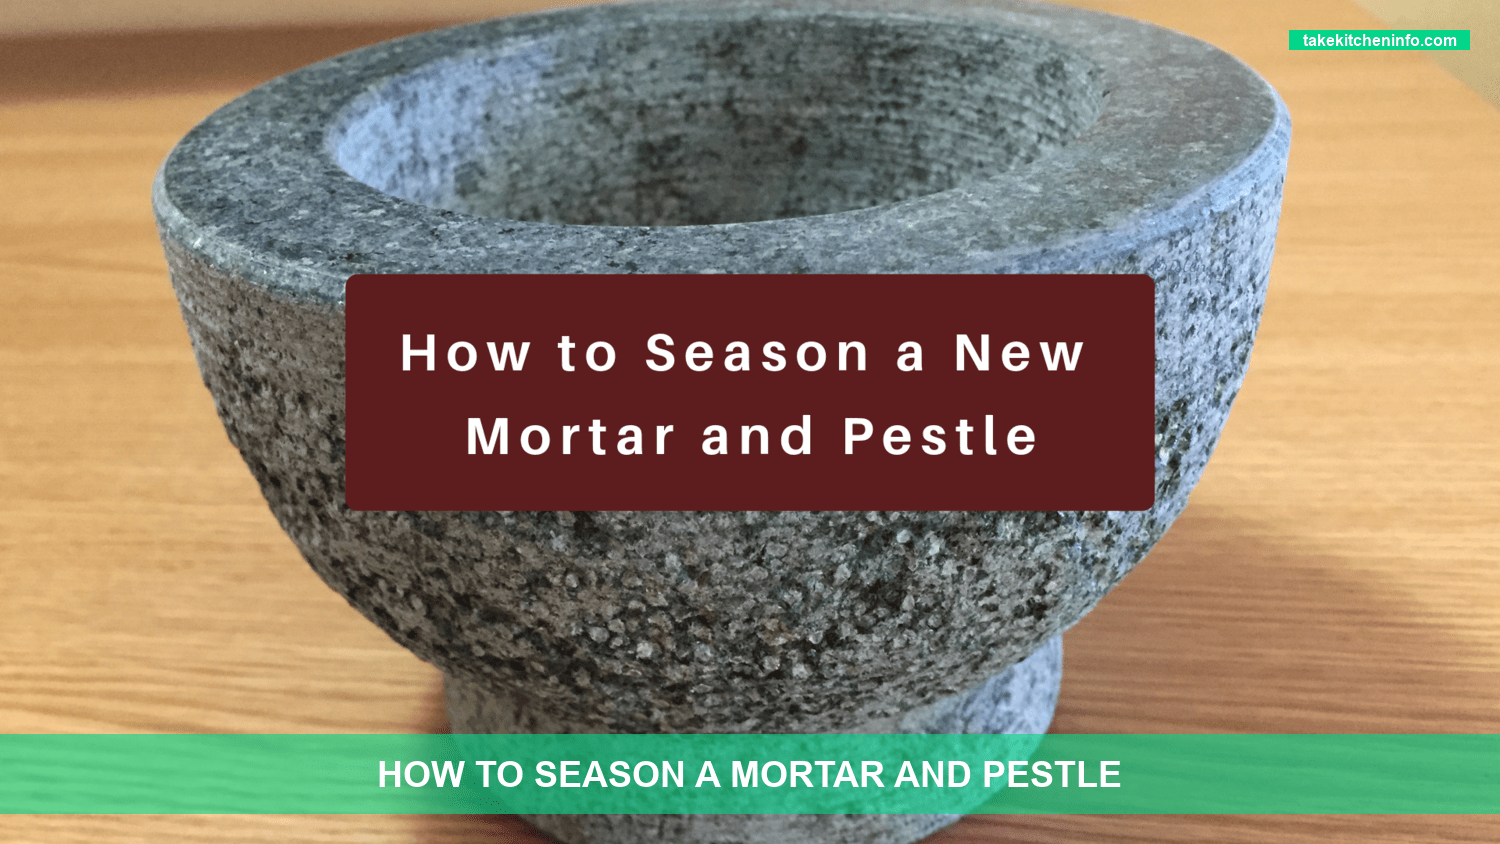 How To Season A Mortar And Pestle